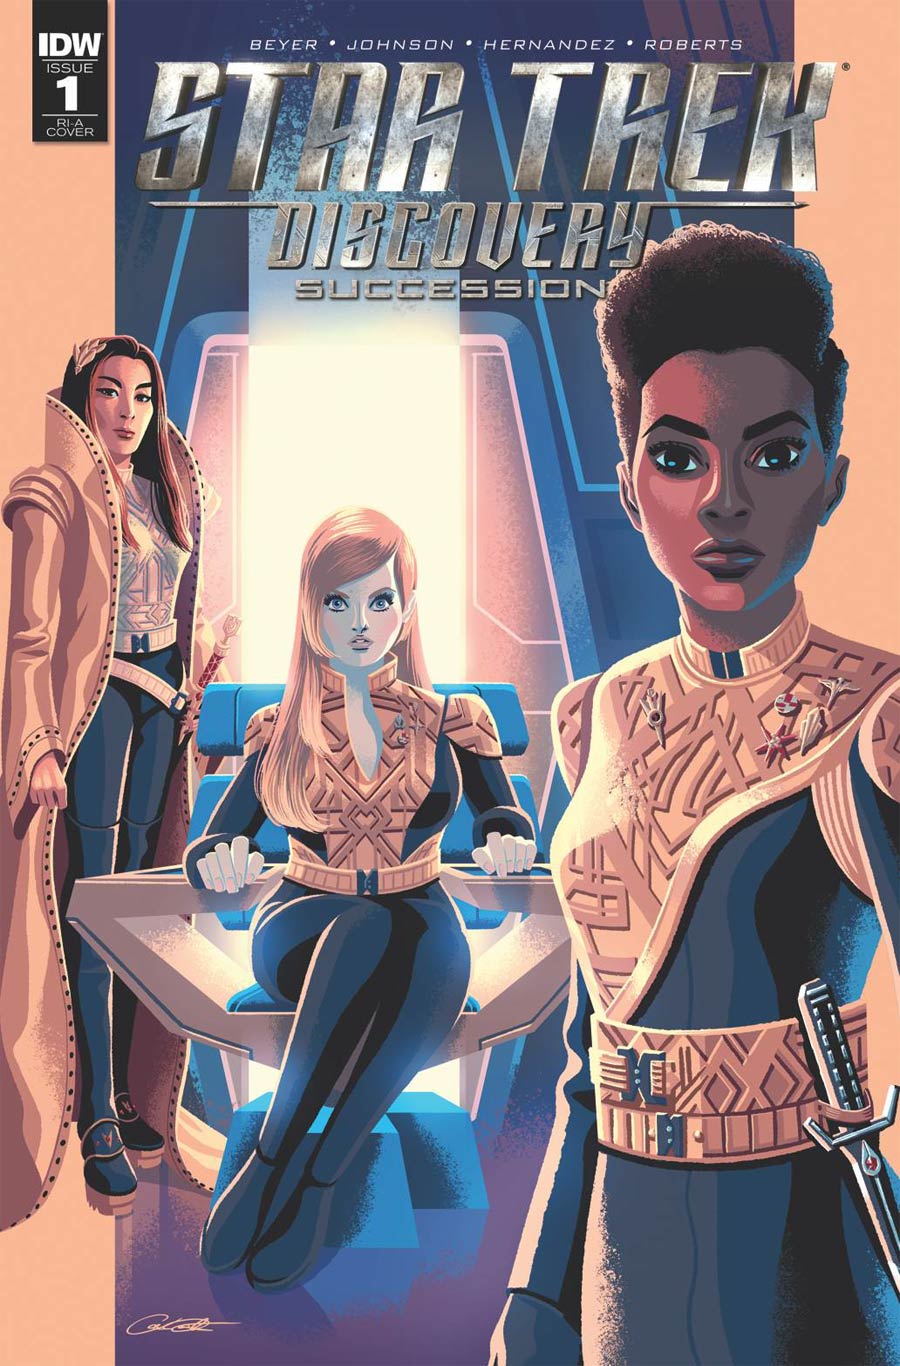 Star Trek Discovery Succession #1 Cover C Incentive George Caltsoudas Variant Cover